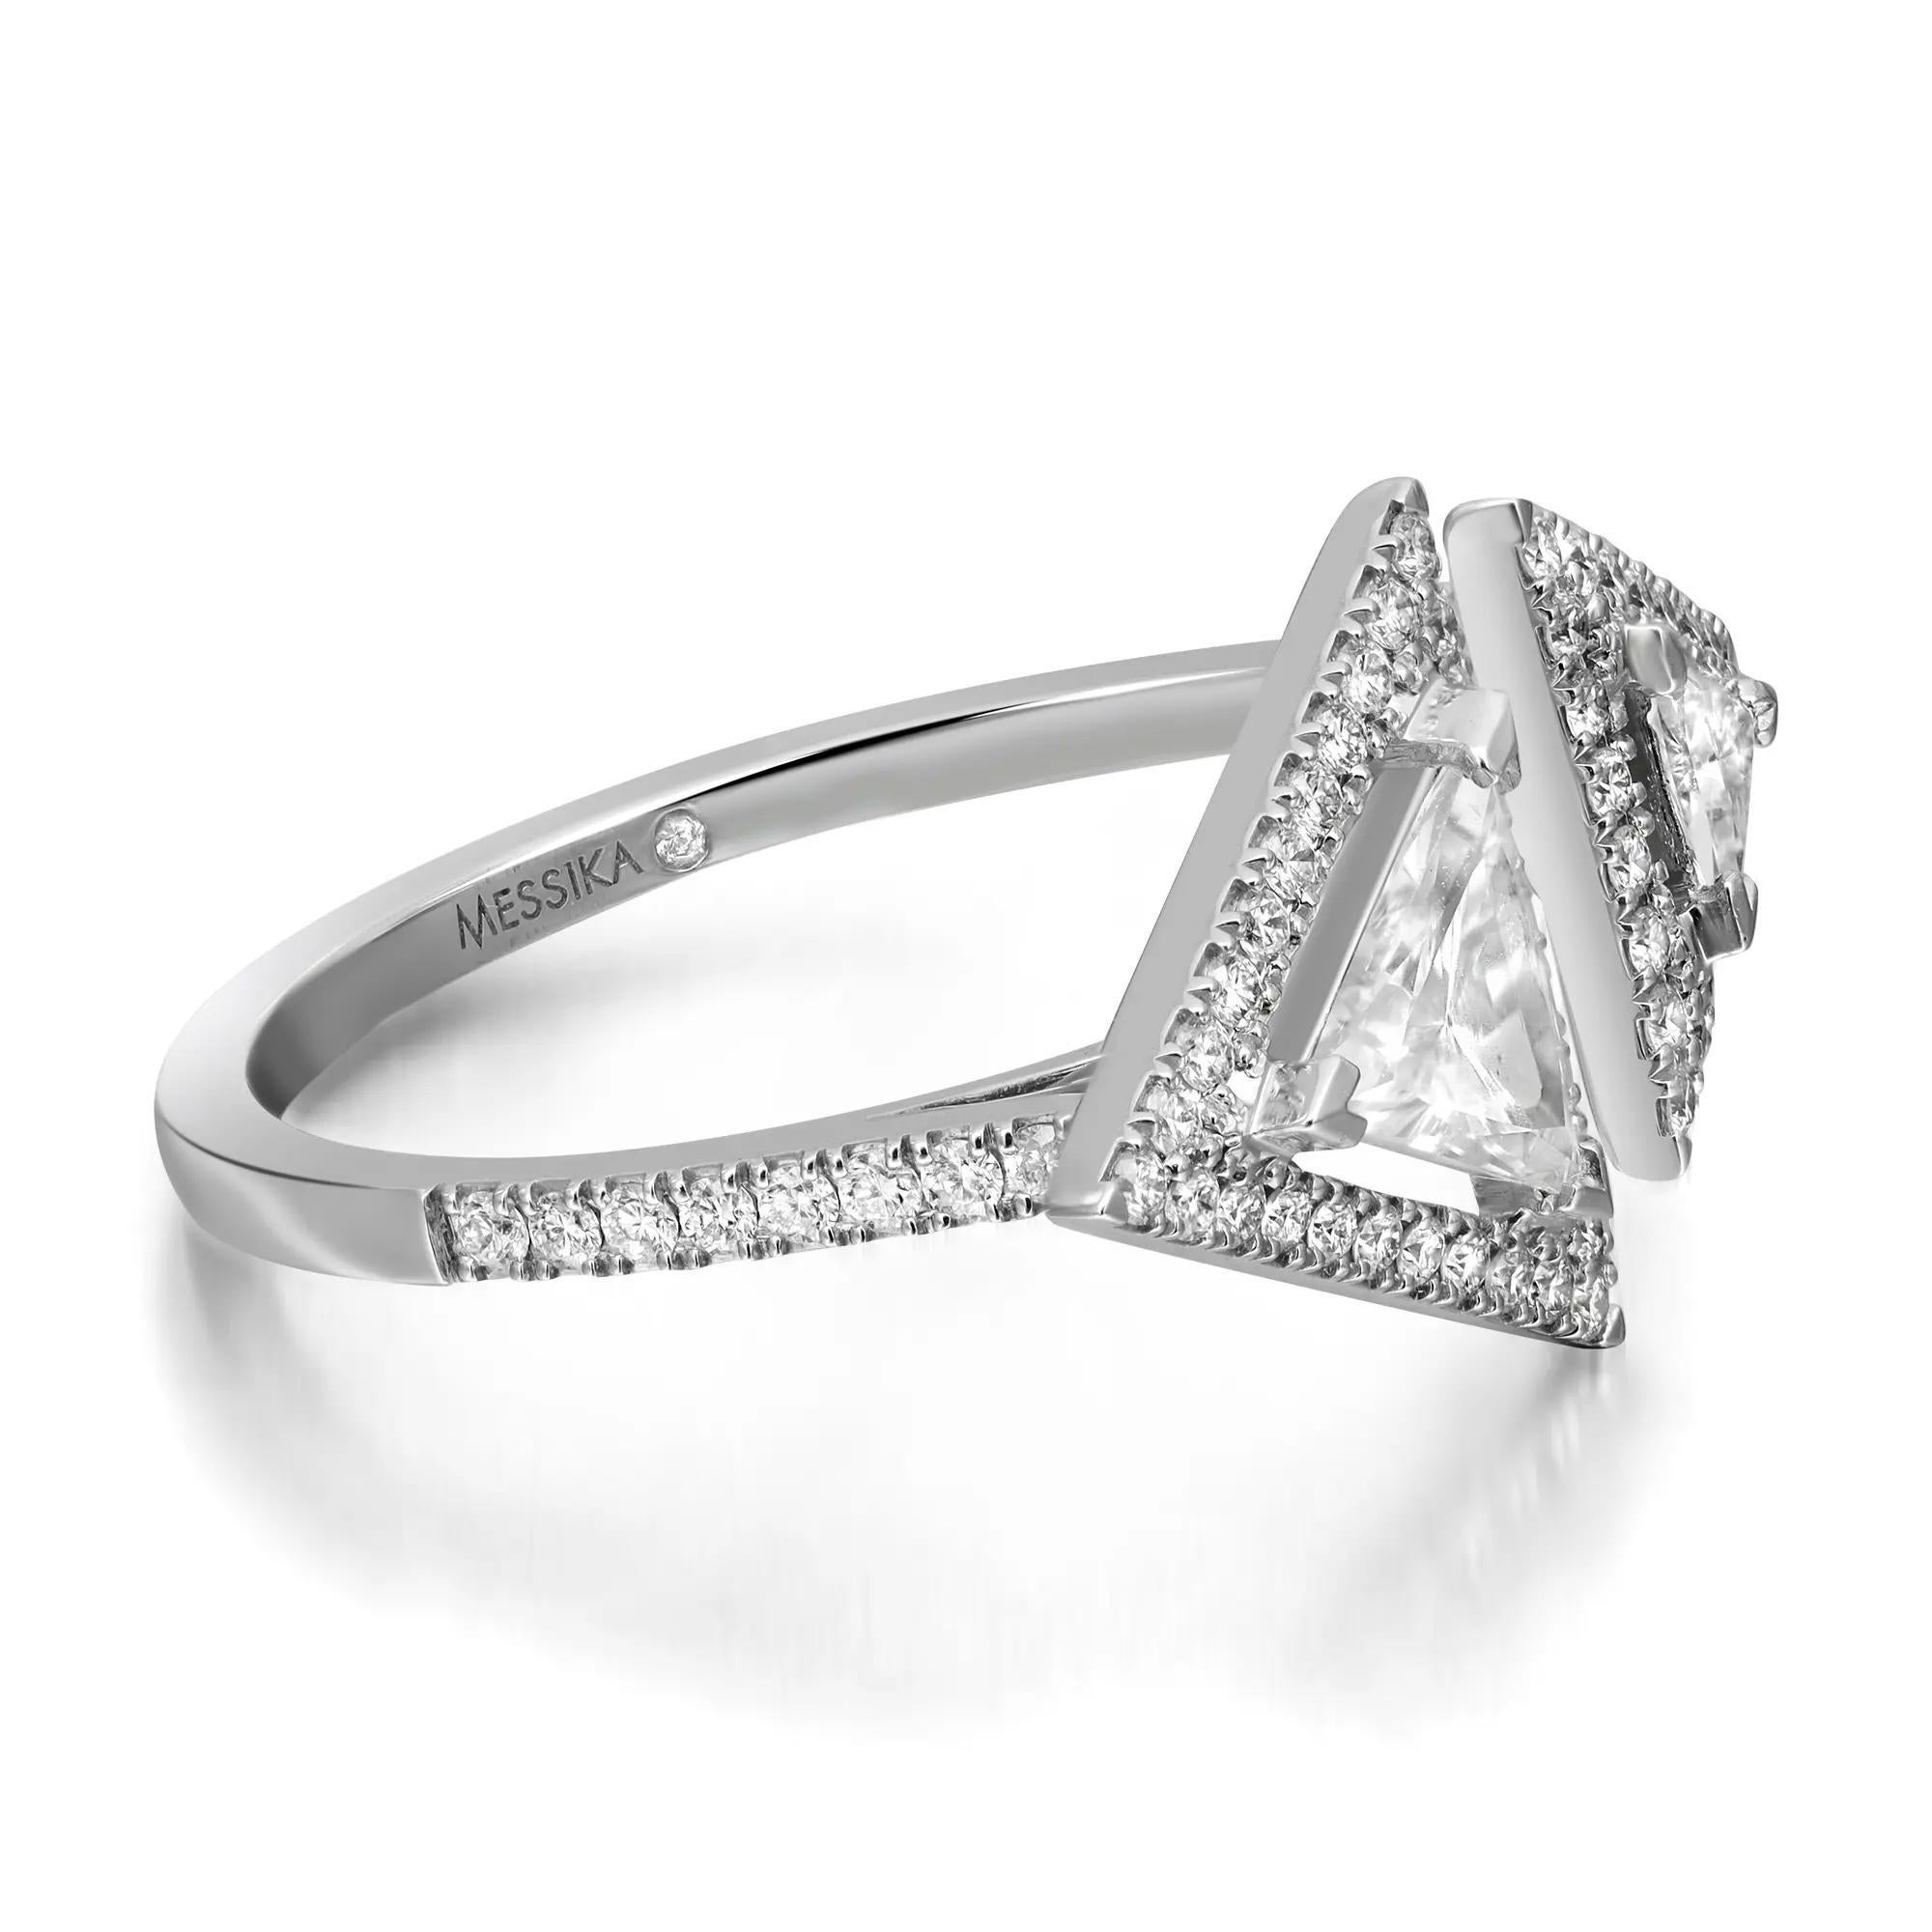 This stunning one of a kind Messika Thea Toi & Moi diamond ring is crafted in 18K white gold. Adorned with two triangular diamonds with a halo of round brilliant cut diamonds in pave setting. Total diamond weight: 0.65 carat. Diamond color G and